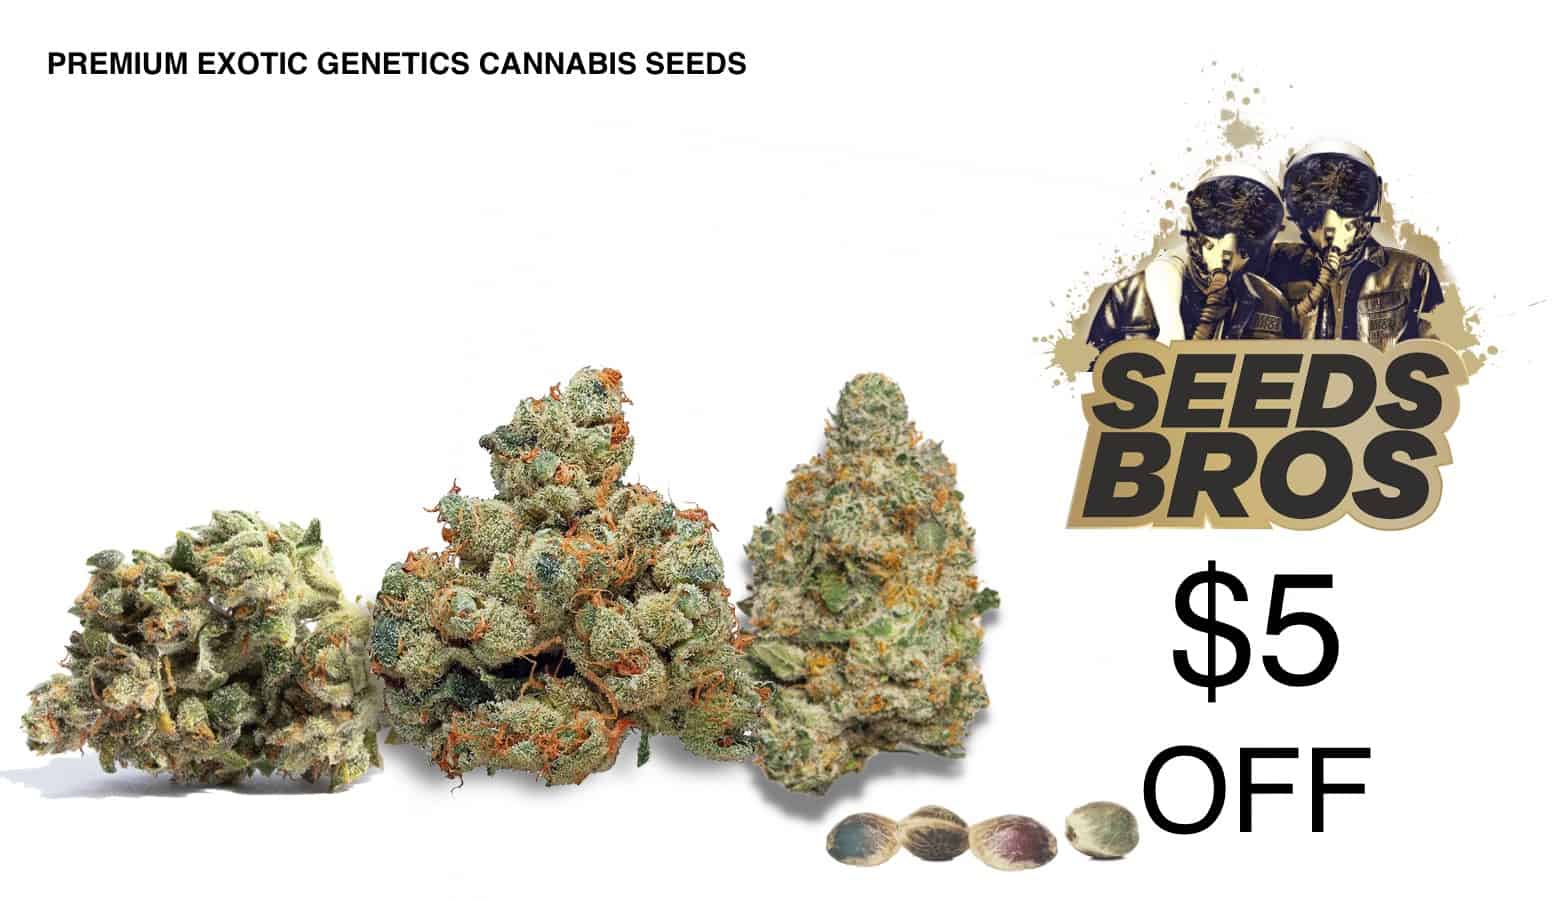 Seeds Bros Coupon Code $5 Off - Save On Cannabis